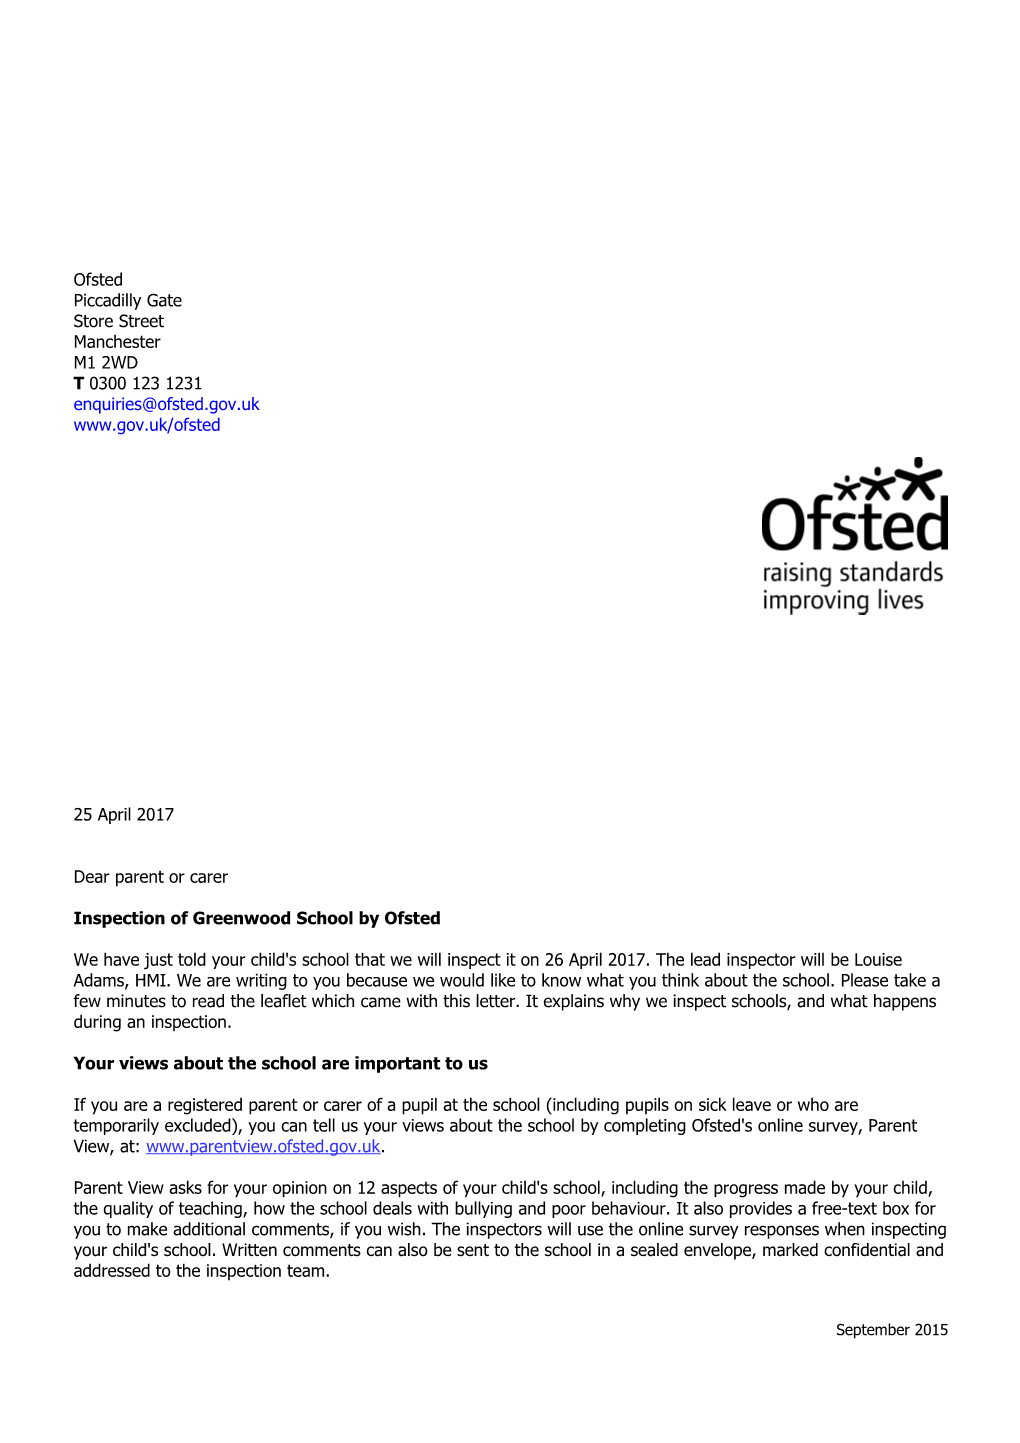 Inspection of Greenwood School by Ofsted